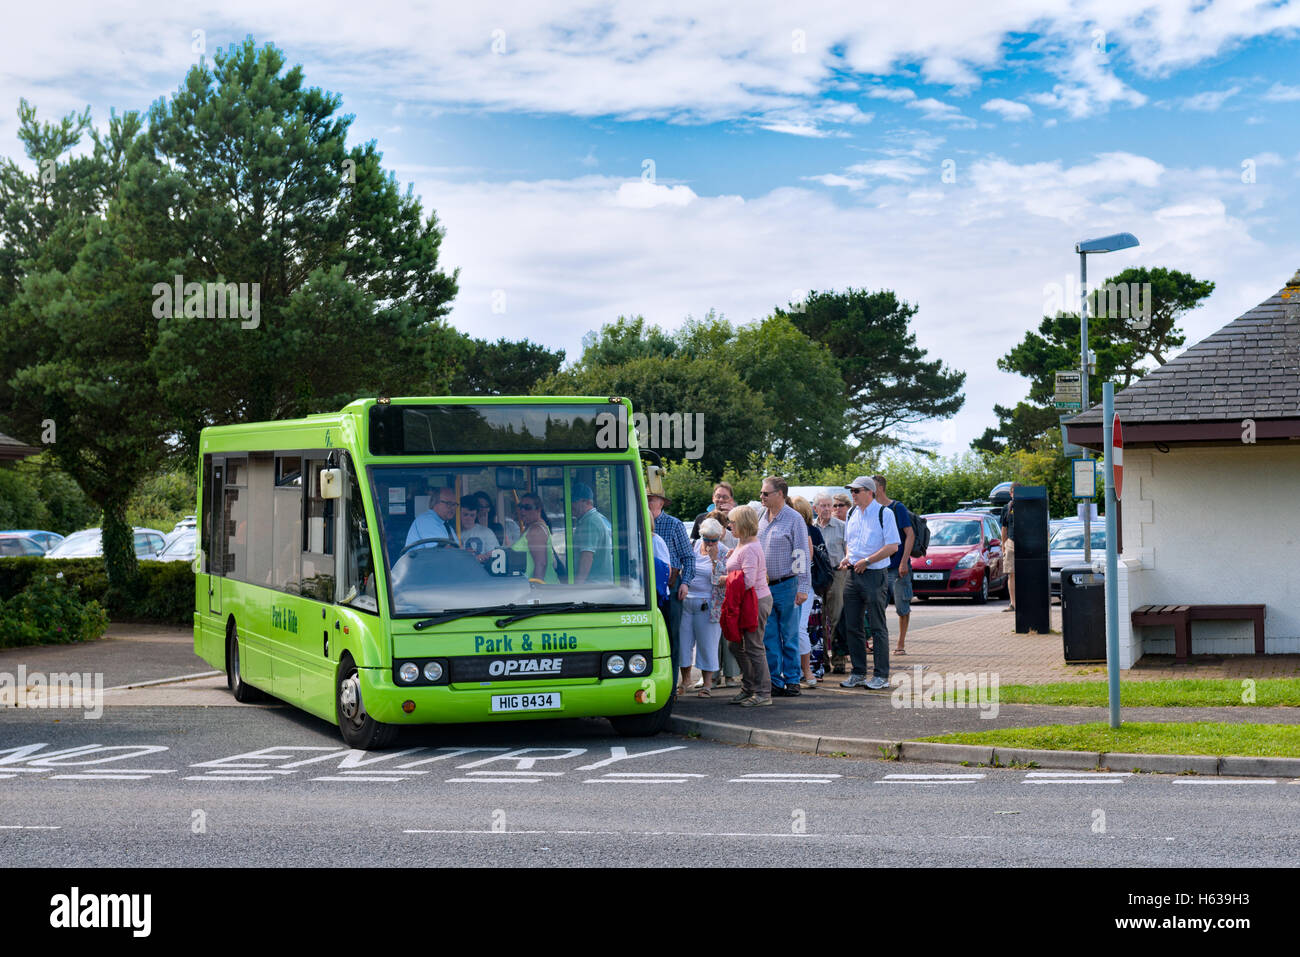 Passengers board a smart Park and Ride bus bound for Dartmouth town in Devon, UK Stock Photo